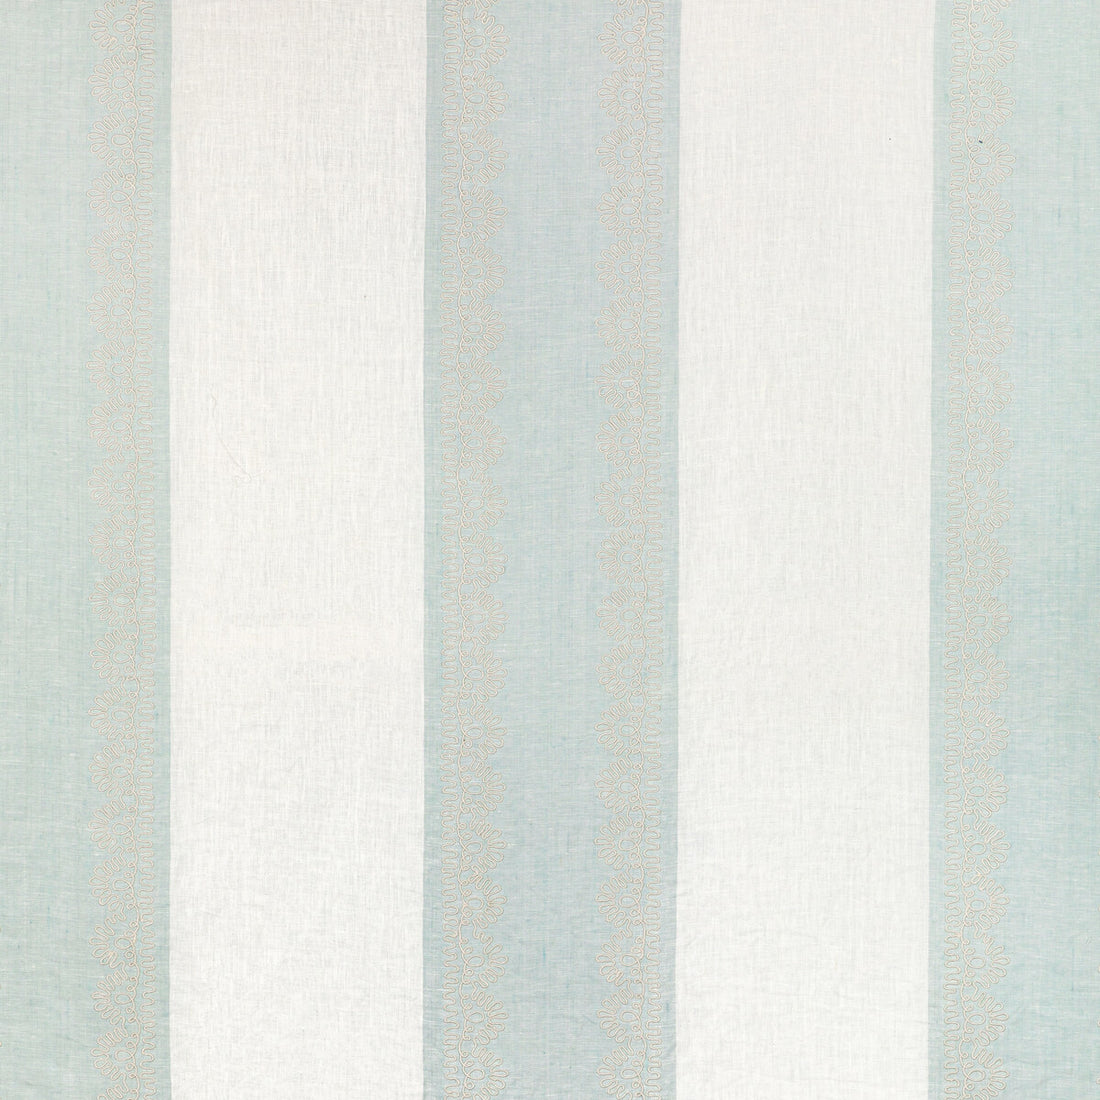 Banner Sheer fabric in aqua color - pattern 2021123.13.0 - by Lee Jofa in the Summerland collection